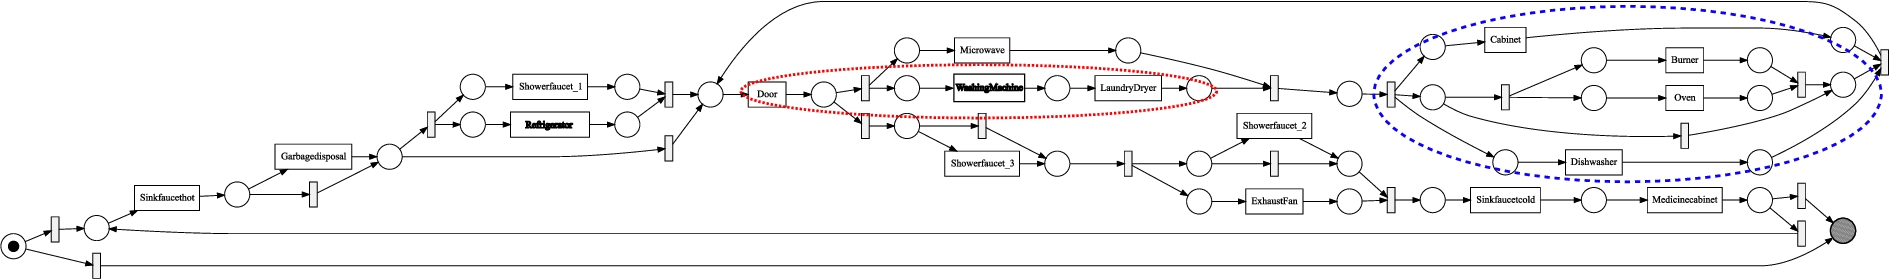 The Inductive Miner infrequent (20% filtering) process model discovered from the refined MIT A event log.